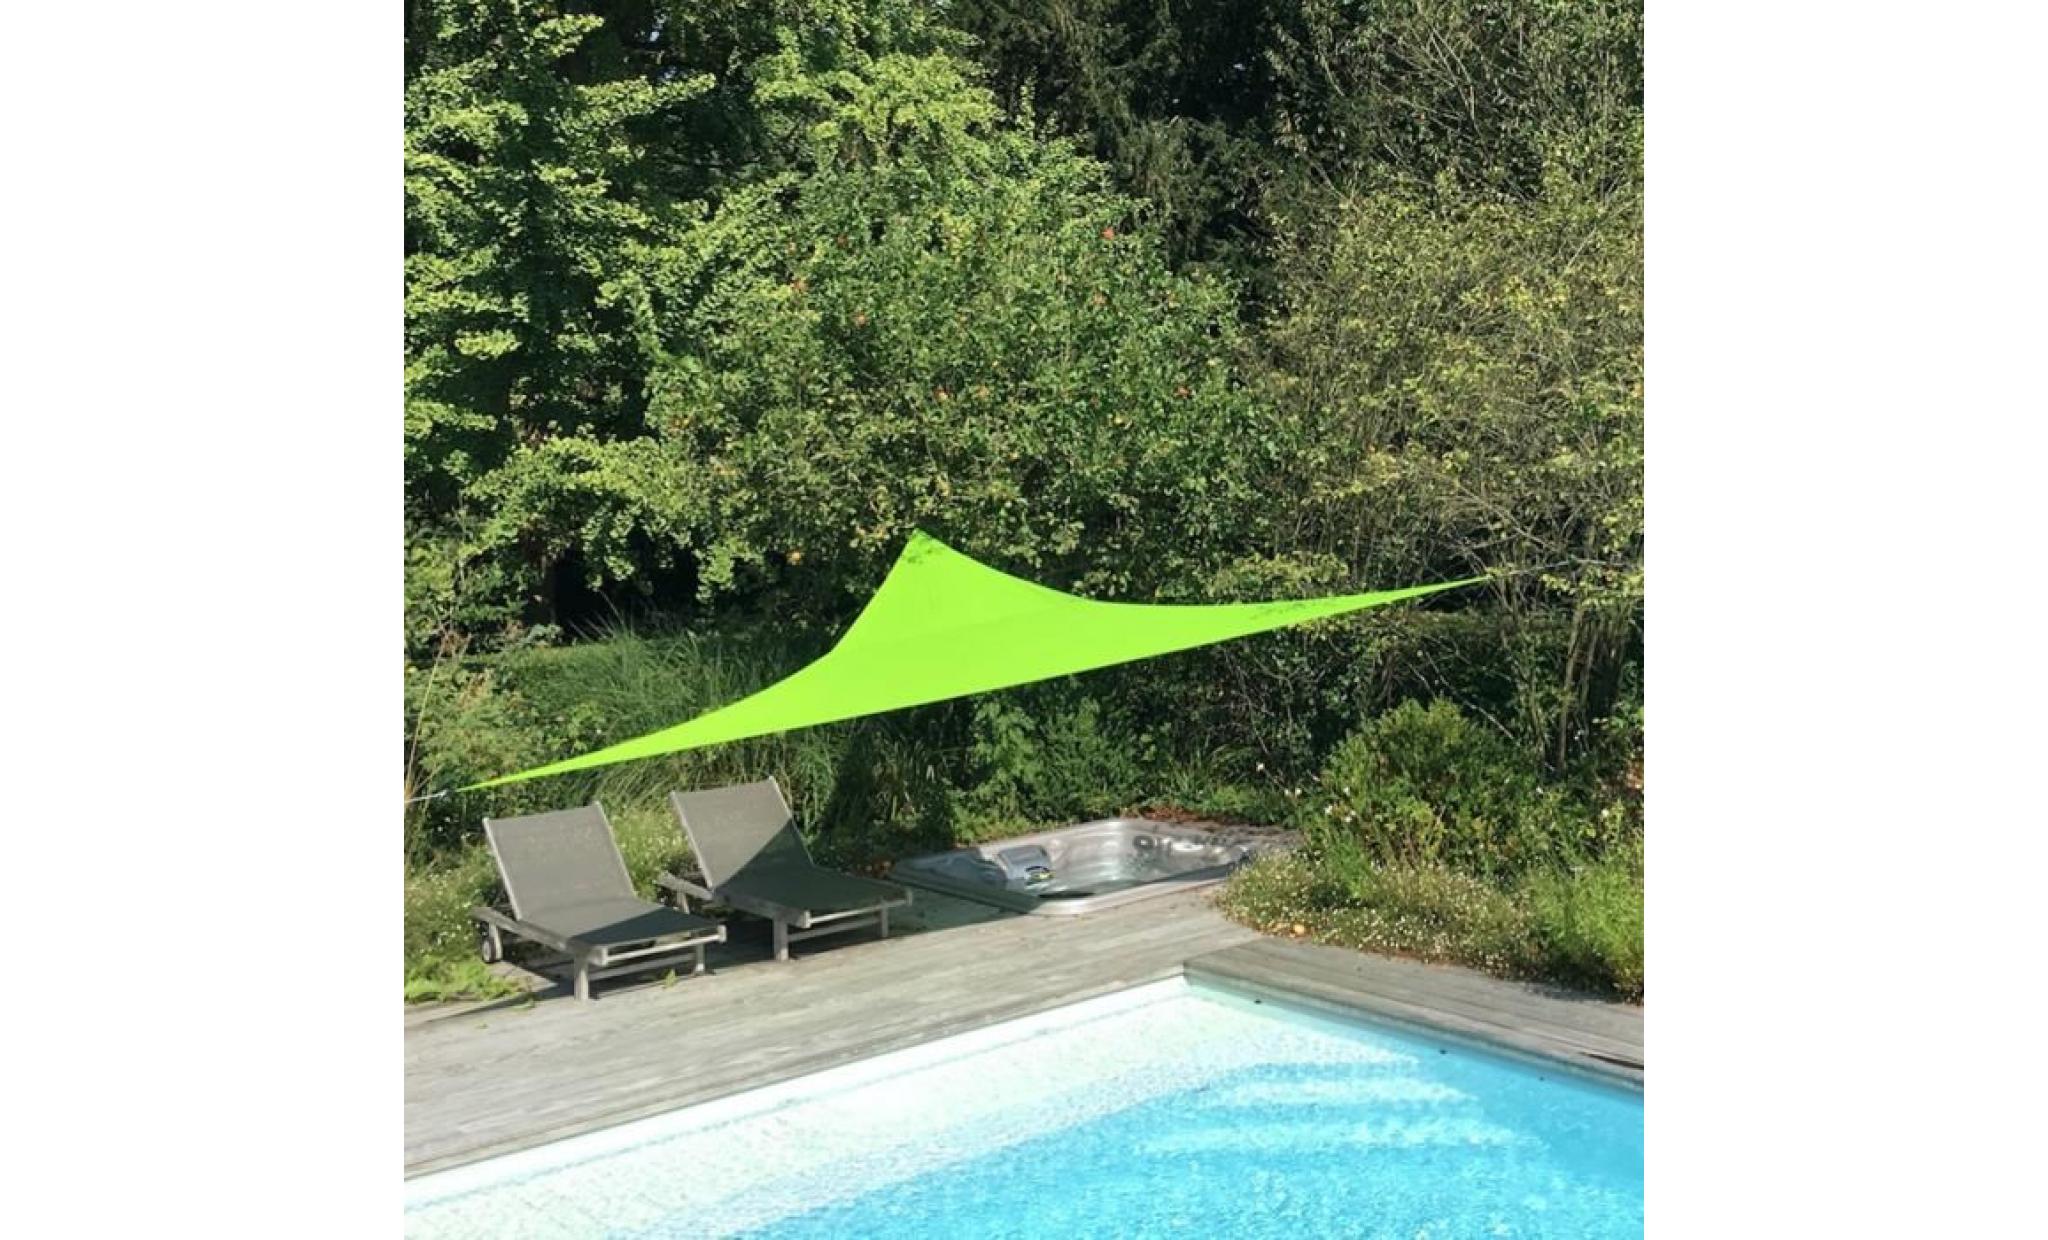 voile d’ombrage triangulaire extensible easywind 4 x 4 x 5,7m   gris   anti uv upf 50+ pas cher